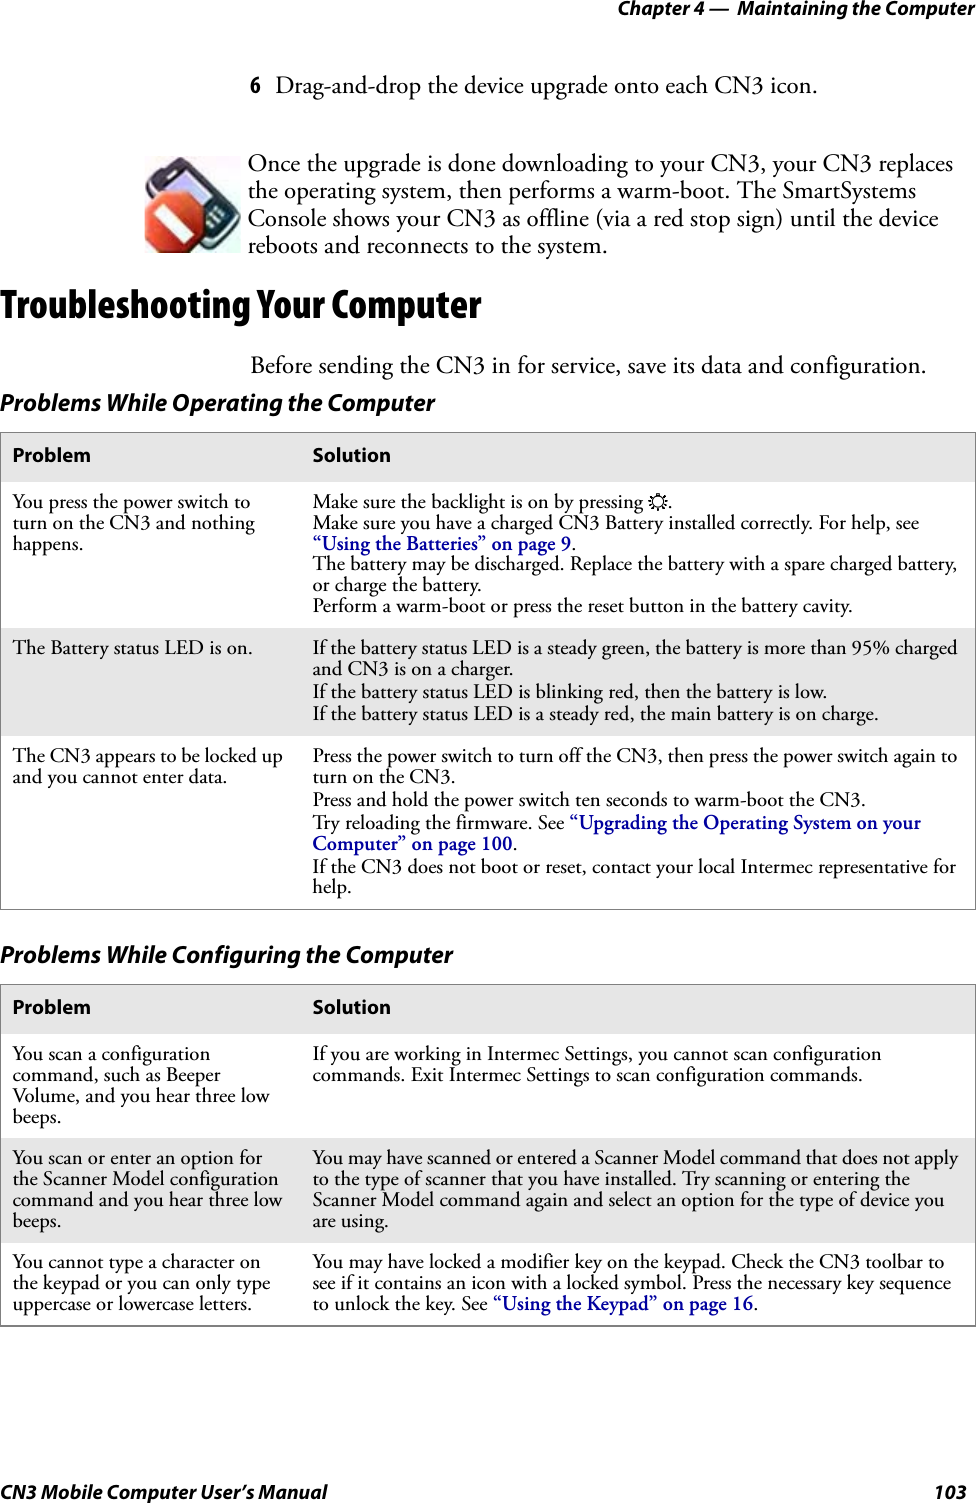 Chapter 4 —  Maintaining the ComputerCN3 Mobile Computer User’s Manual 1036Drag-and-drop the device upgrade onto each CN3 icon.Troubleshooting Your ComputerBefore sending the CN3 in for service, save its data and configuration. Once the upgrade is done downloading to your CN3, your CN3 replaces the operating system, then performs a warm-boot. The SmartSystems Console shows your CN3 as offline (via a red stop sign) until the device reboots and reconnects to the system.Problems While Operating the ComputerProblem SolutionYou press the power switch to turn on the CN3 and nothing happens.Make sure the backlight is on by pressing E.Make sure you have a charged CN3 Battery installed correctly. For help, see “Using the Batteries” on page 9.The battery may be discharged. Replace the battery with a spare charged battery, or charge the battery.Perform a warm-boot or press the reset button in the battery cavity.The Battery status LED is on. If the battery status LED is a steady green, the battery is more than 95% charged and CN3 is on a charger.If the battery status LED is blinking red, then the battery is low.If the battery status LED is a steady red, the main battery is on charge.The CN3 appears to be locked up and you cannot enter data.Press the power switch to turn off the CN3, then press the power switch again to turn on the CN3.Press and hold the power switch ten seconds to warm-boot the CN3.Try reloading the firmware. See “Upgrading the Operating System on your Computer” on page 100.If the CN3 does not boot or reset, contact your local Intermec representative for help.Problems While Configuring the ComputerProblem SolutionYou scan a configuration command, such as Beeper Volume, and you hear three low beeps.If you are working in Intermec Settings, you cannot scan configuration commands. Exit Intermec Settings to scan configuration commands.You scan or enter an option for the Scanner Model configuration command and you hear three low beeps.You may have scanned or entered a Scanner Model command that does not apply to the type of scanner that you have installed. Try scanning or entering the Scanner Model command again and select an option for the type of device you are using.You cannot type a character on the keypad or you can only type uppercase or lowercase letters.You may have locked a modifier key on the keypad. Check the CN3 toolbar to see if it contains an icon with a locked symbol. Press the necessary key sequence to unlock the key. See “Using the Keypad” on page 16.